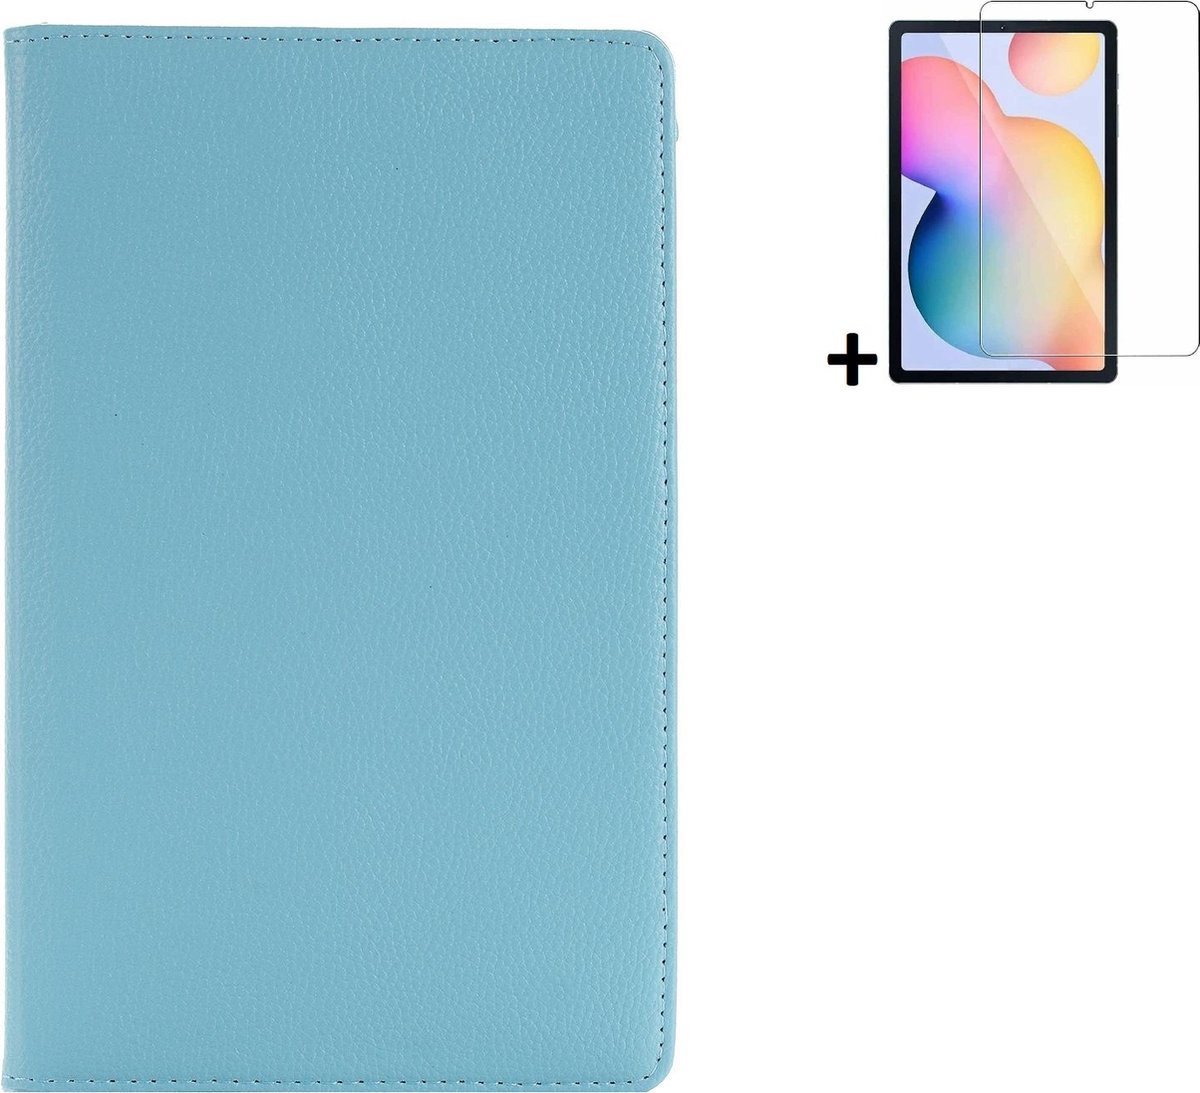 Hoesje Samsung Galaxy Tab S6 Lite - 10.4 inch - Screenprotector Samsung Galaxy Tab S6 Lite - Draaibare Book Case Turquoise + Tempered Glass